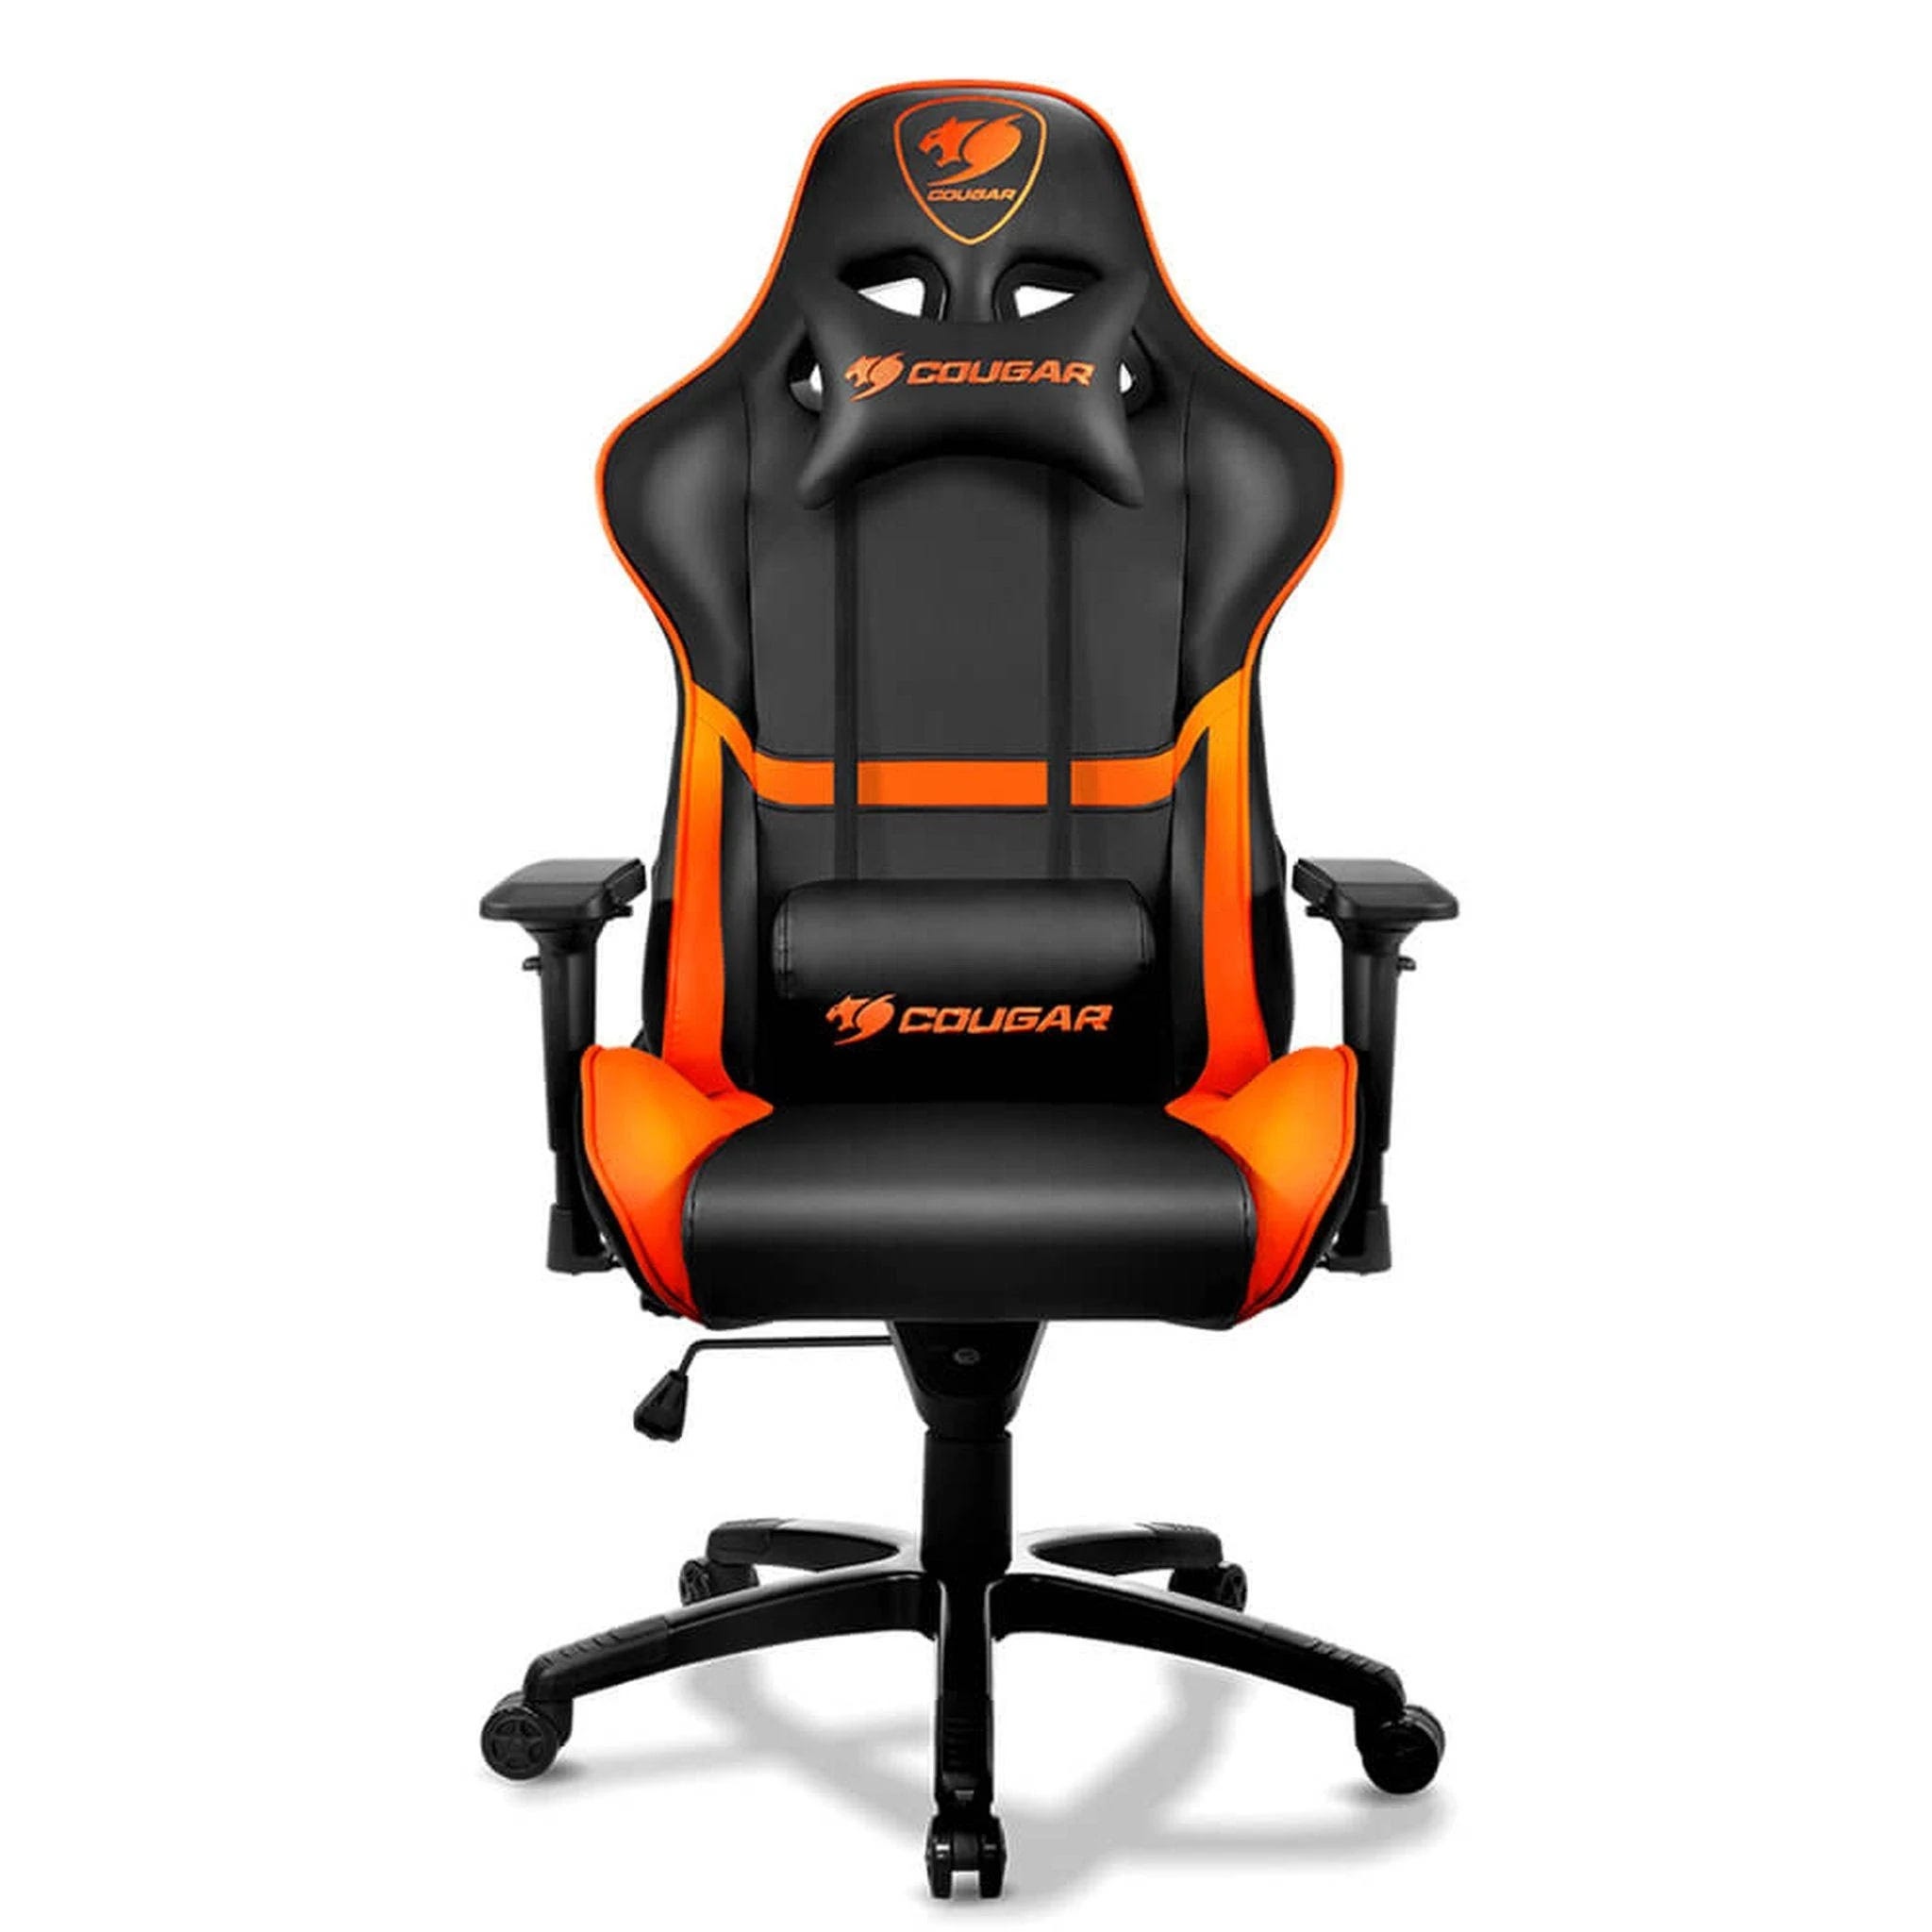 COUGAR Armor Gaming Chair: Ergonomic Comfort for Pro Gamers | Image